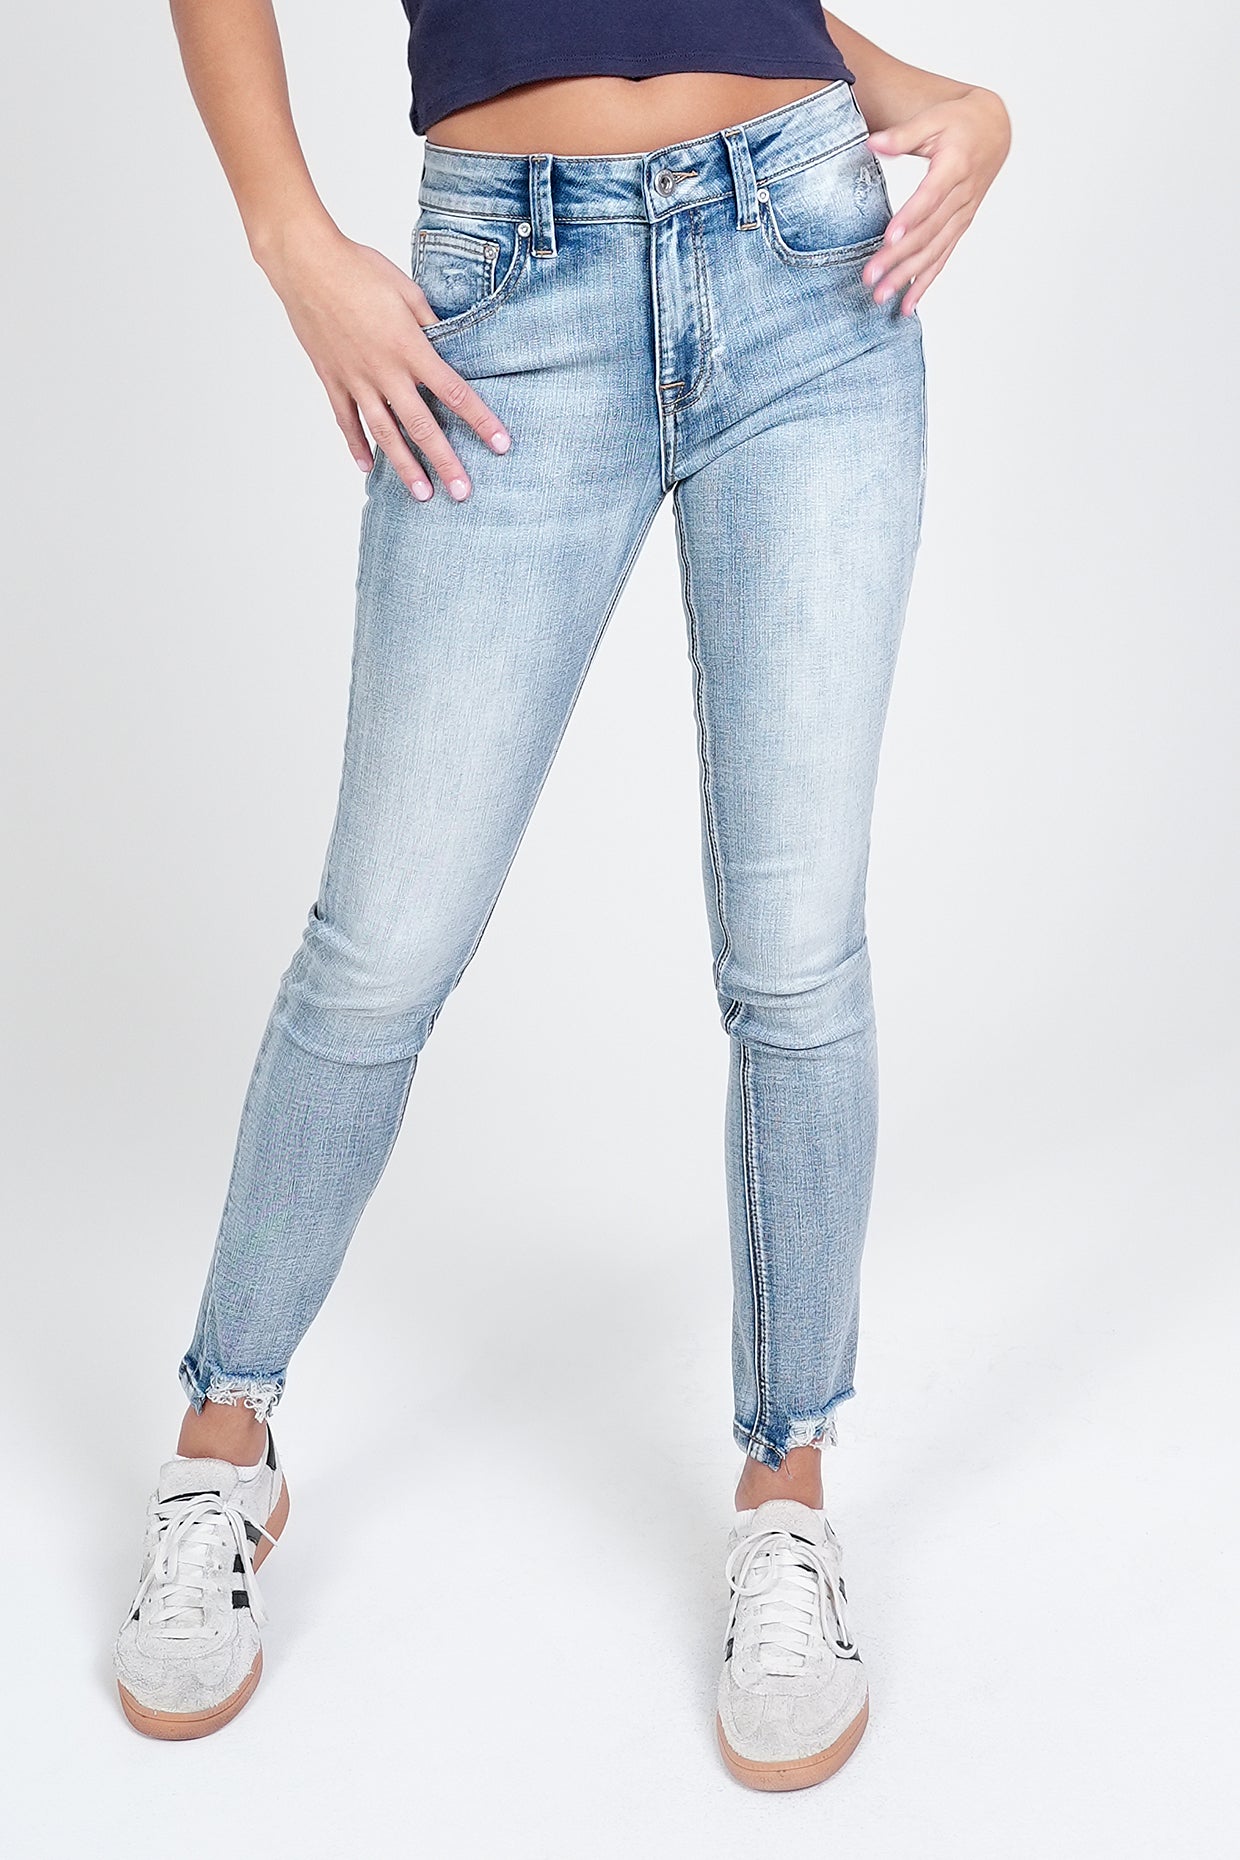 Simple Stitches Basic Light Blue Distressed Mid Rise Skinny Jeans